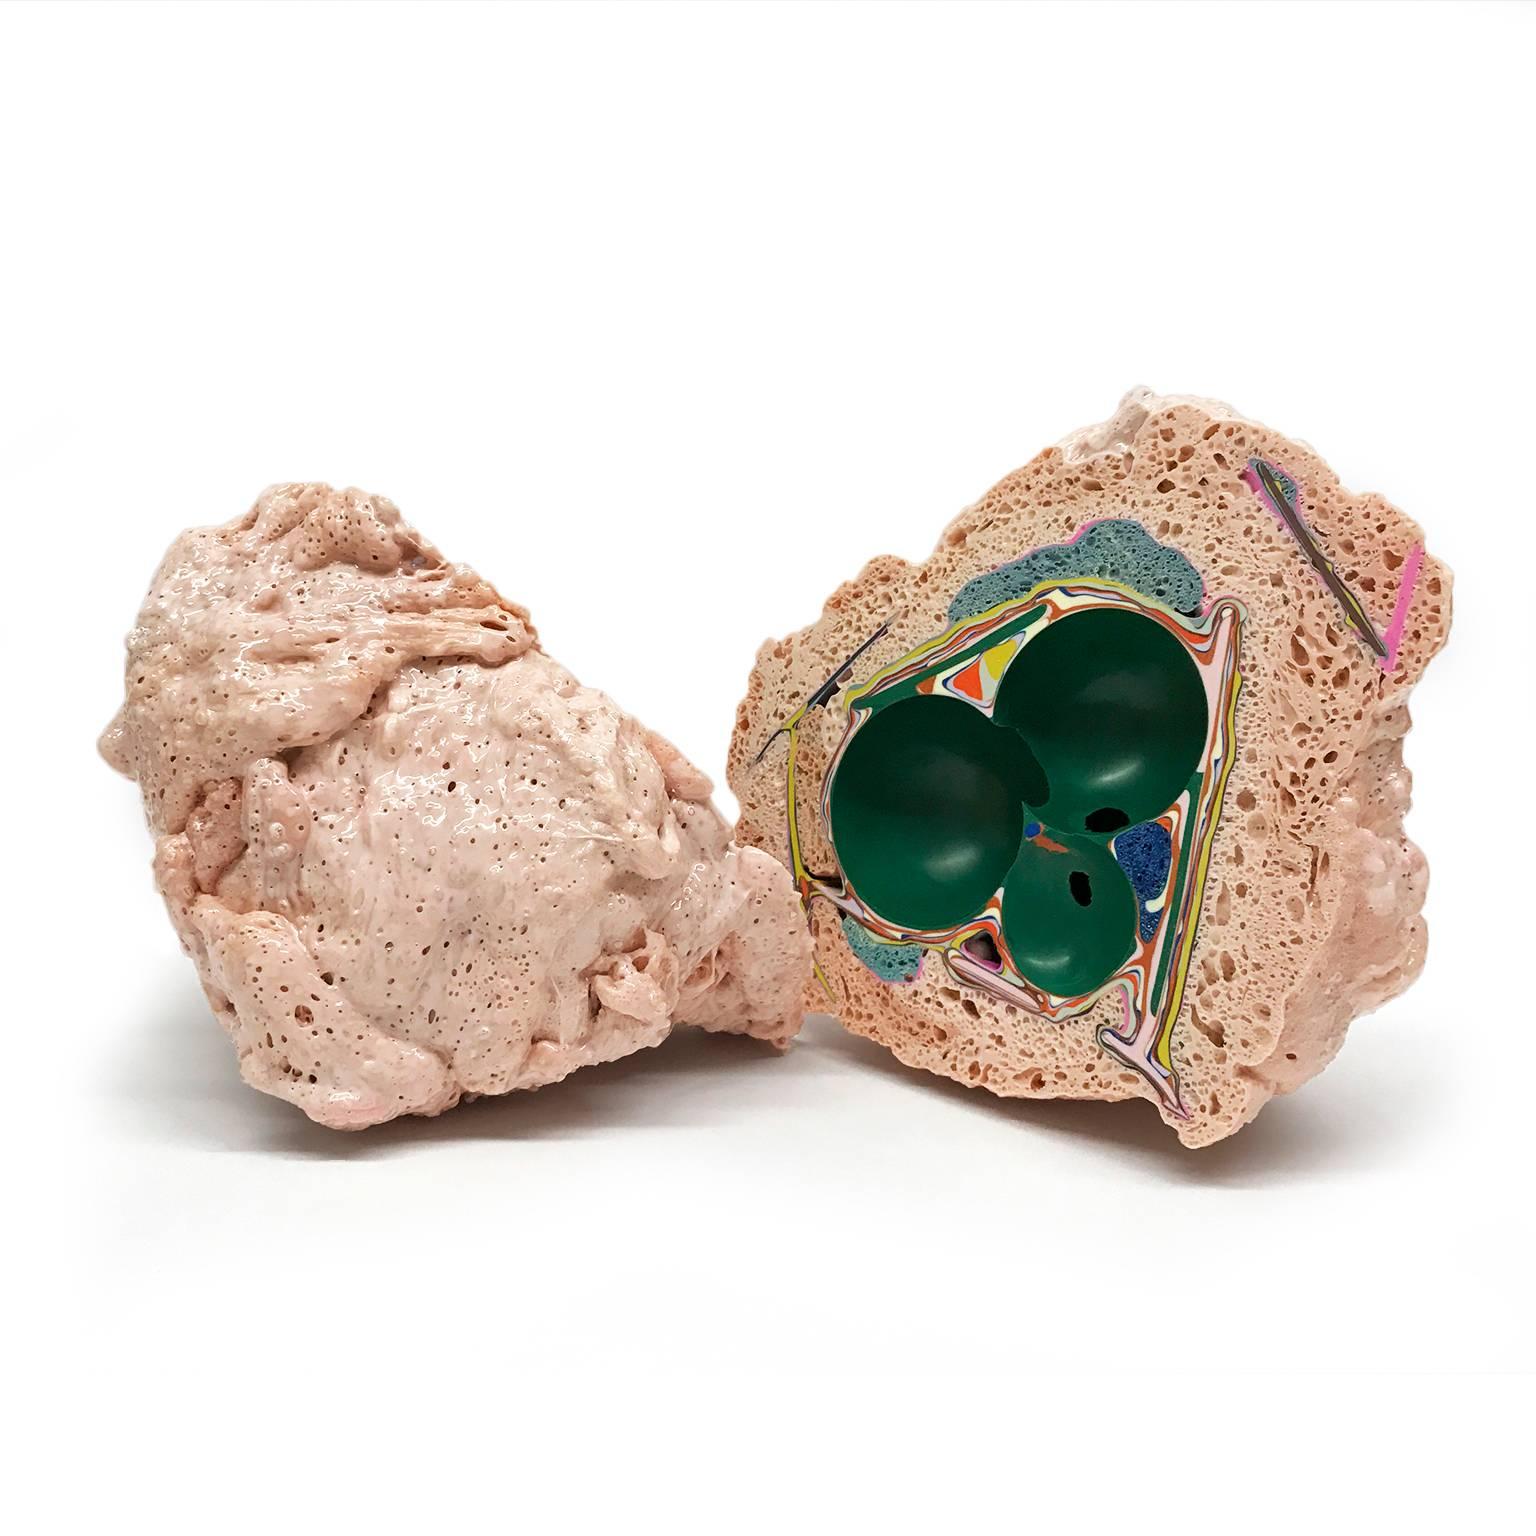 American Unique Handmade Tabletop Geode Sculpture in Emerald Green and Blush Pink For Sale